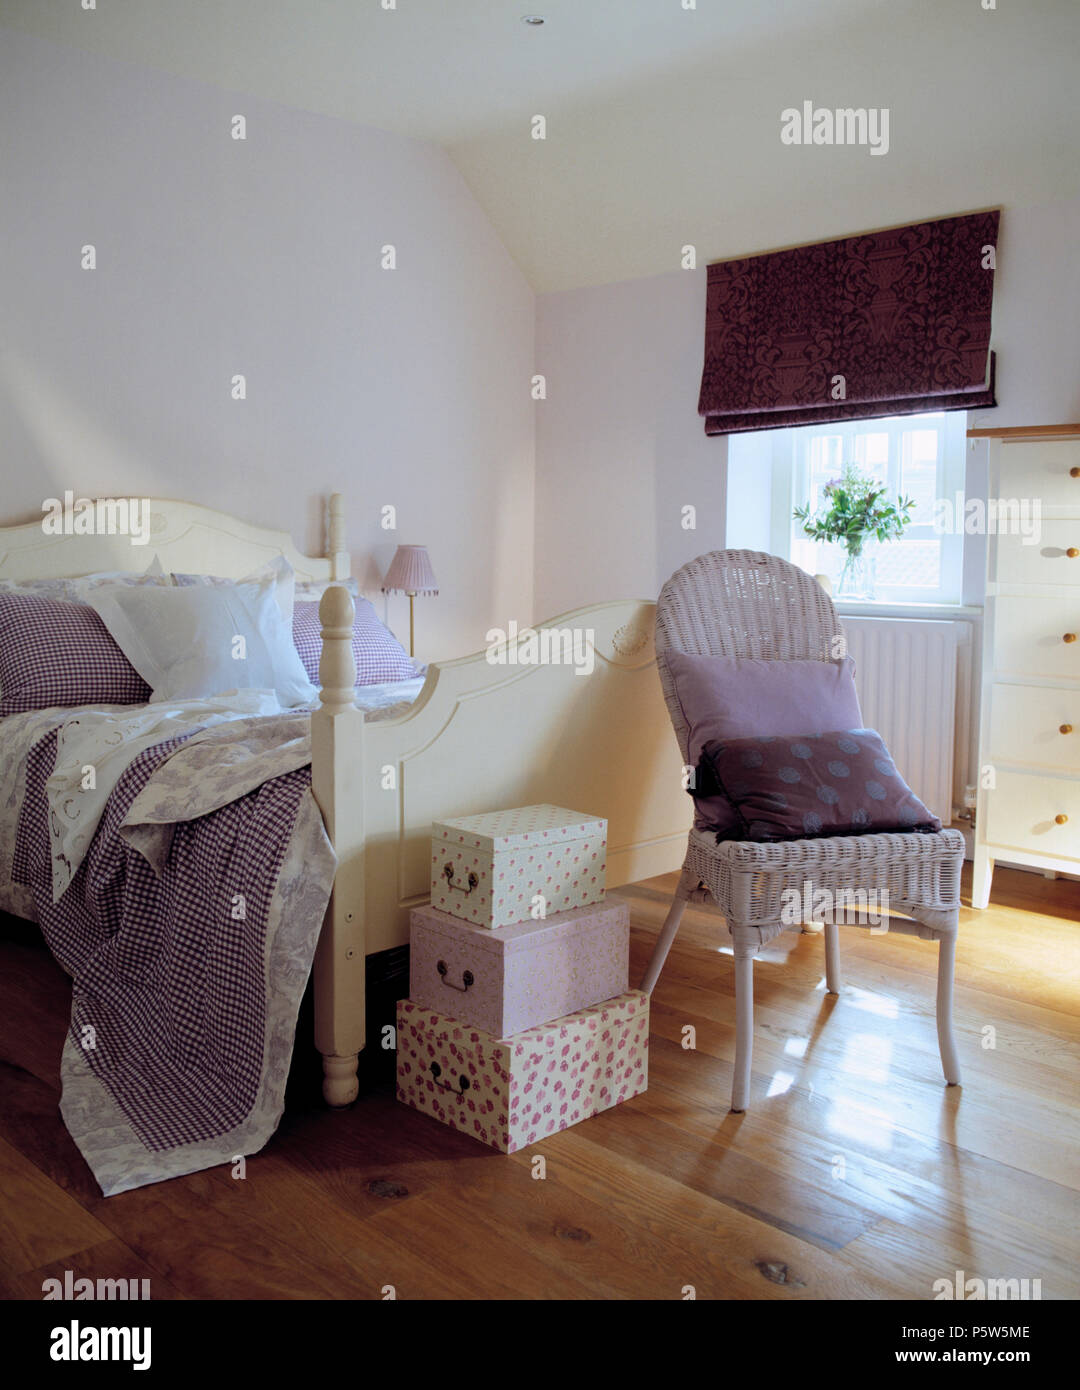 Painted vintage wicker chair beside cream painted bed with mauve quilt in attic bedroom with wooden flooring and purple blind Stock Photo